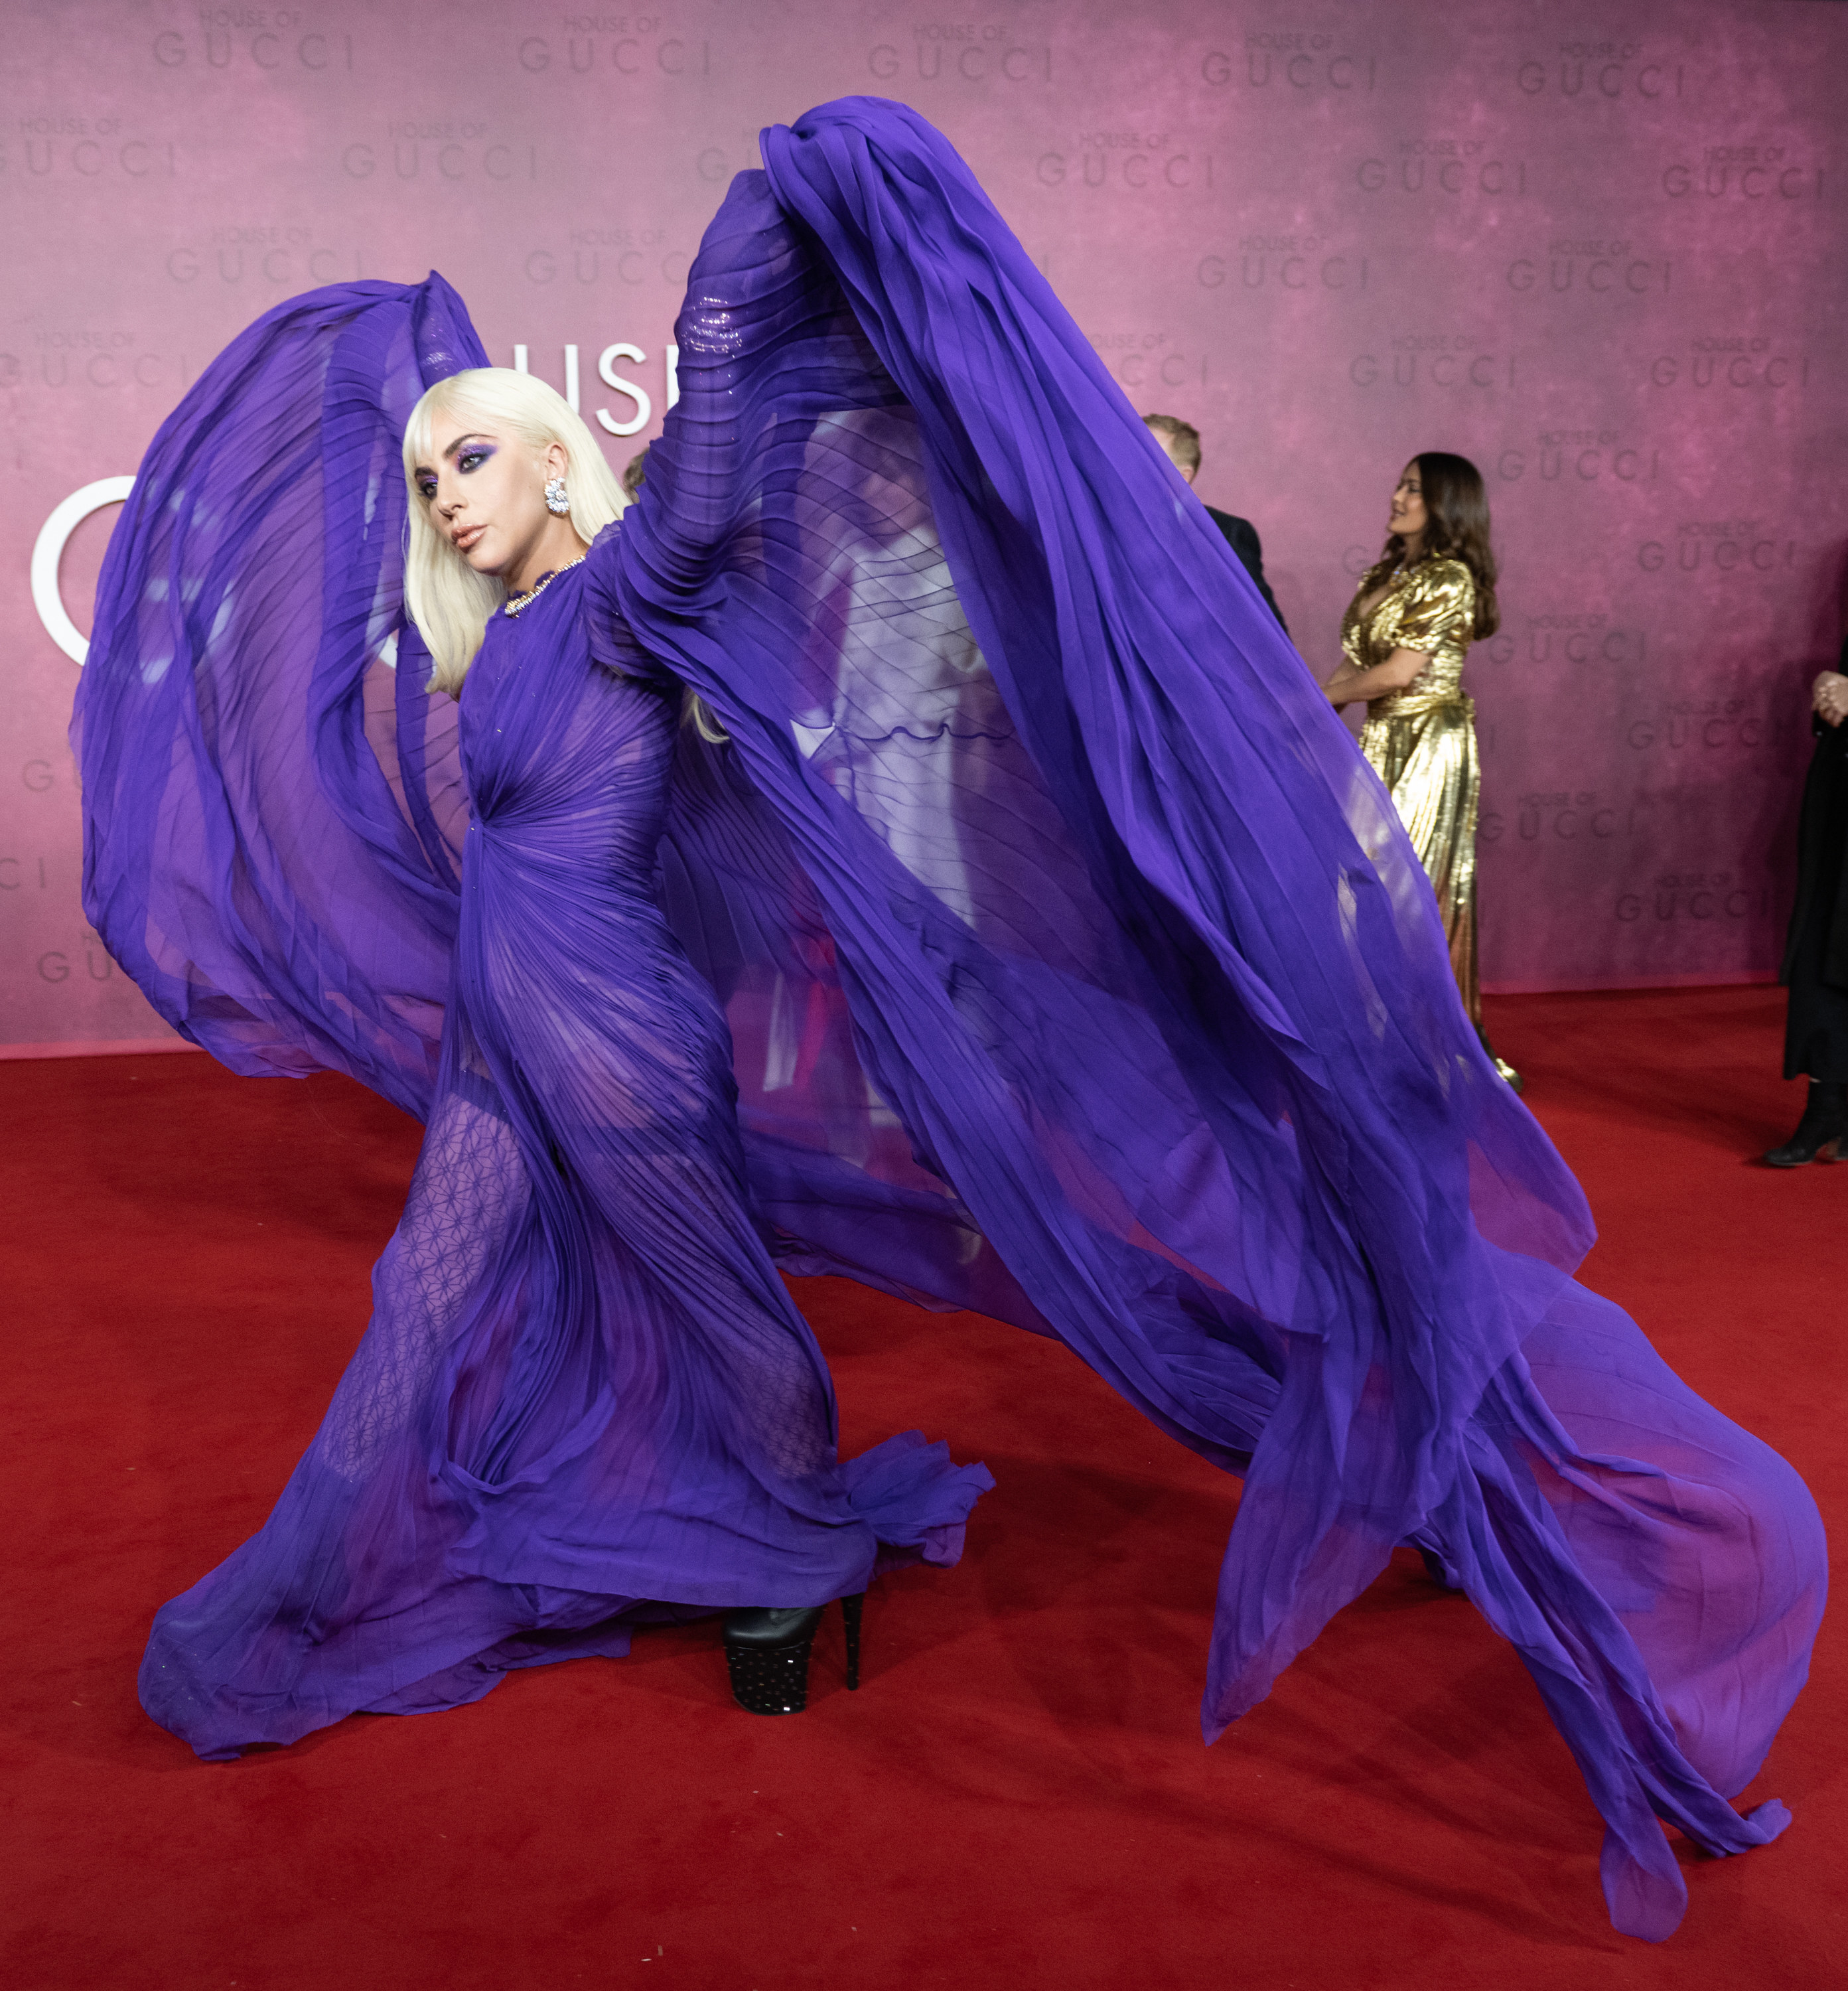 Gaga tossing up the cape of her dress at the premiere of House of Gucci